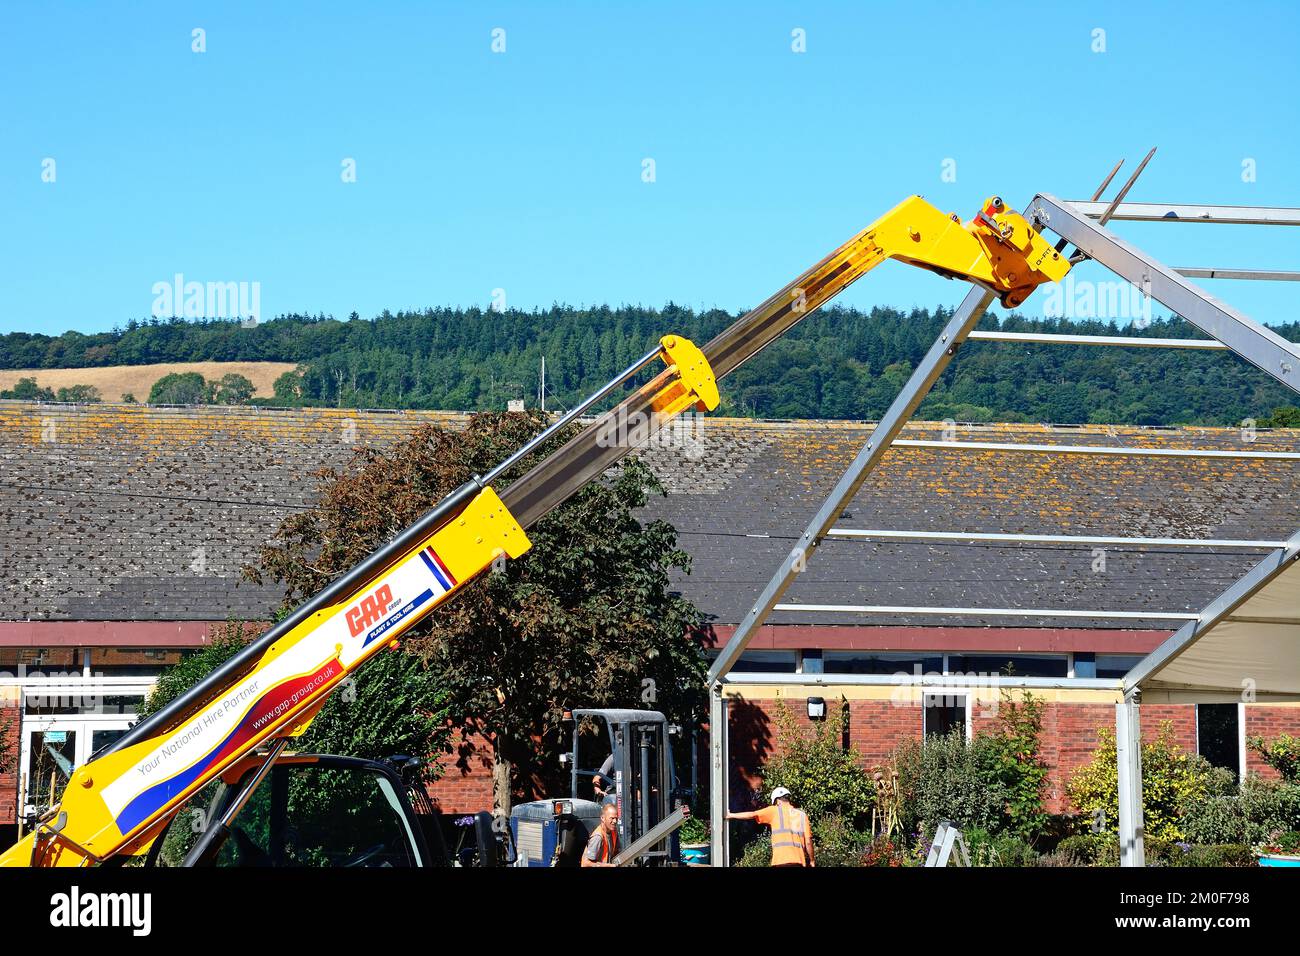 Construction workers removing metal roofing using a hydraulically powered telescopic tractor, Sidmouth, Devon, UK, Europe. Stock Photo